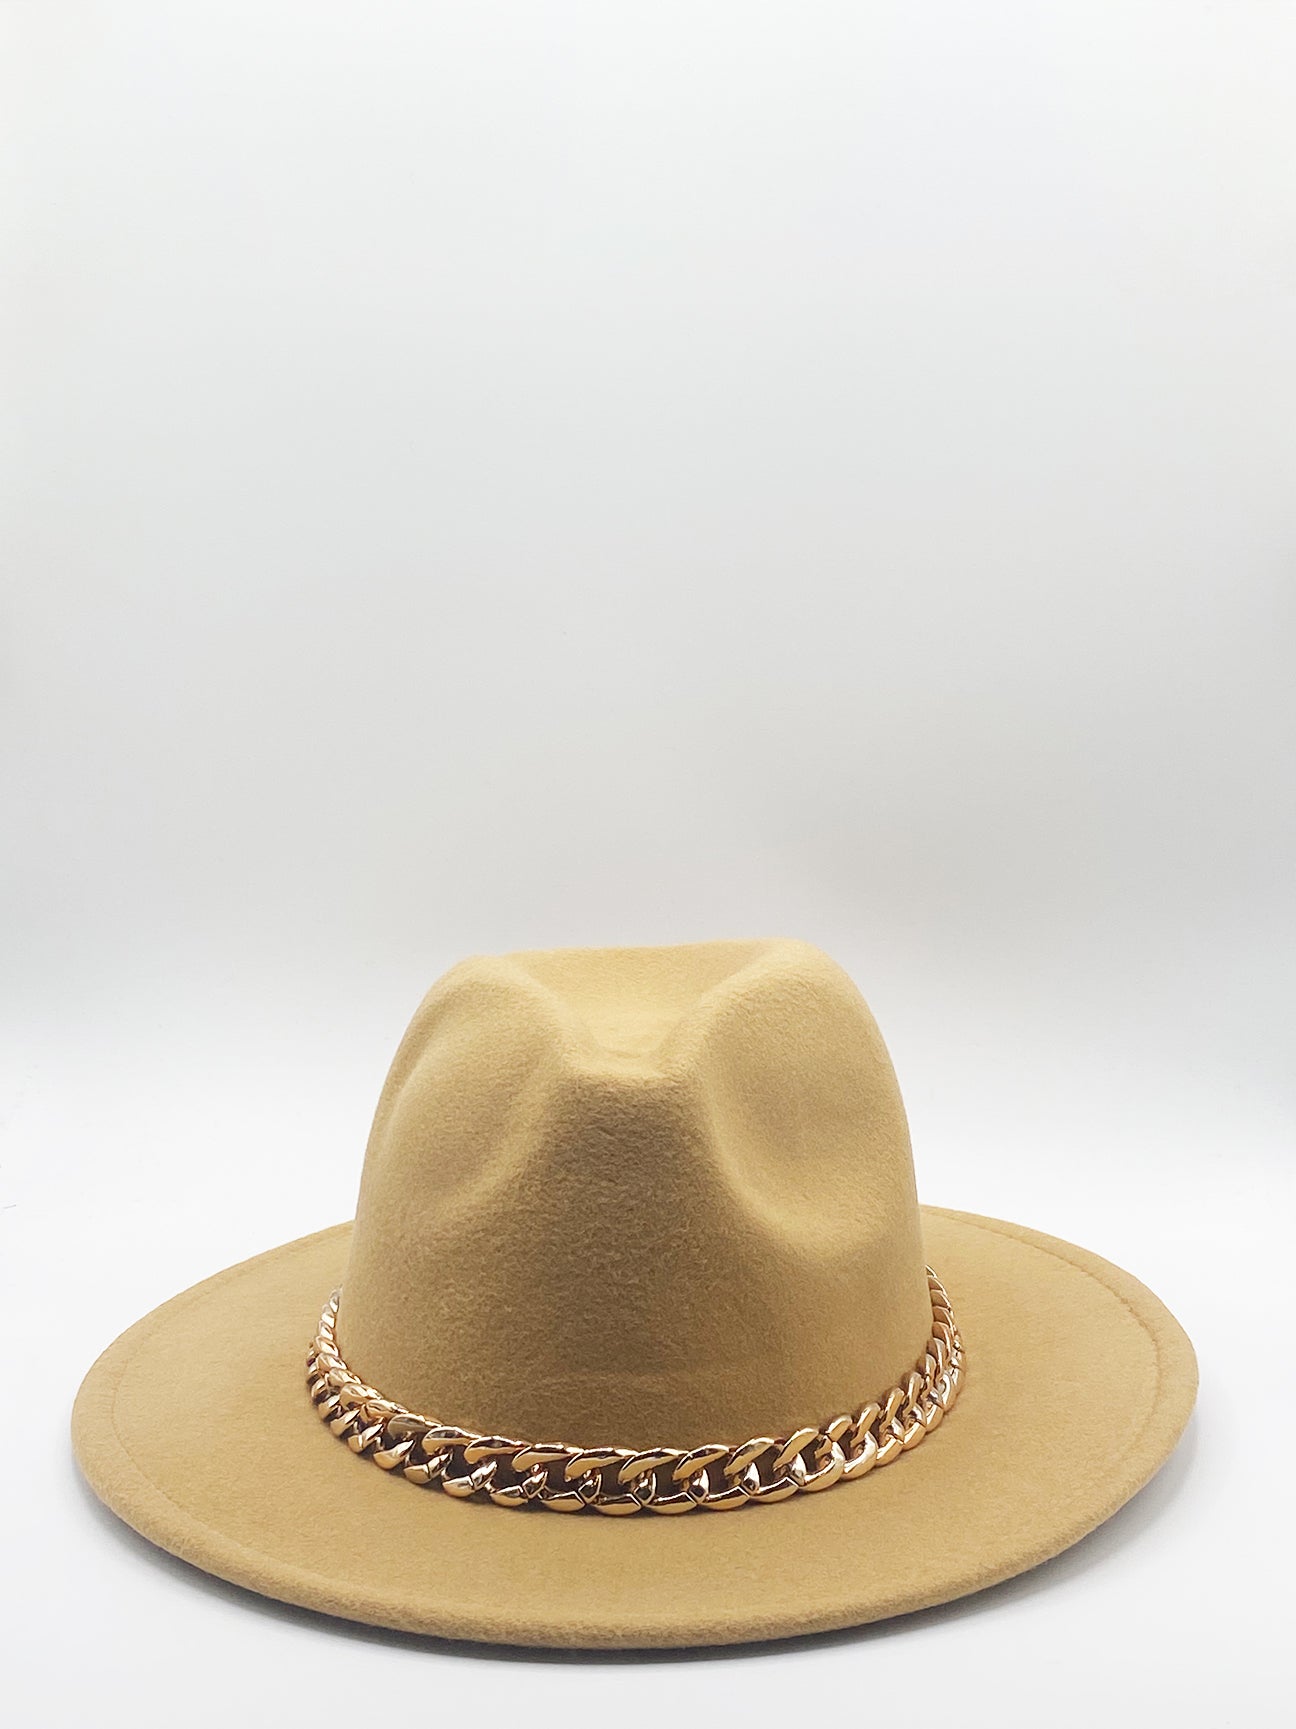 Tan Trilby Hat With Chain Band